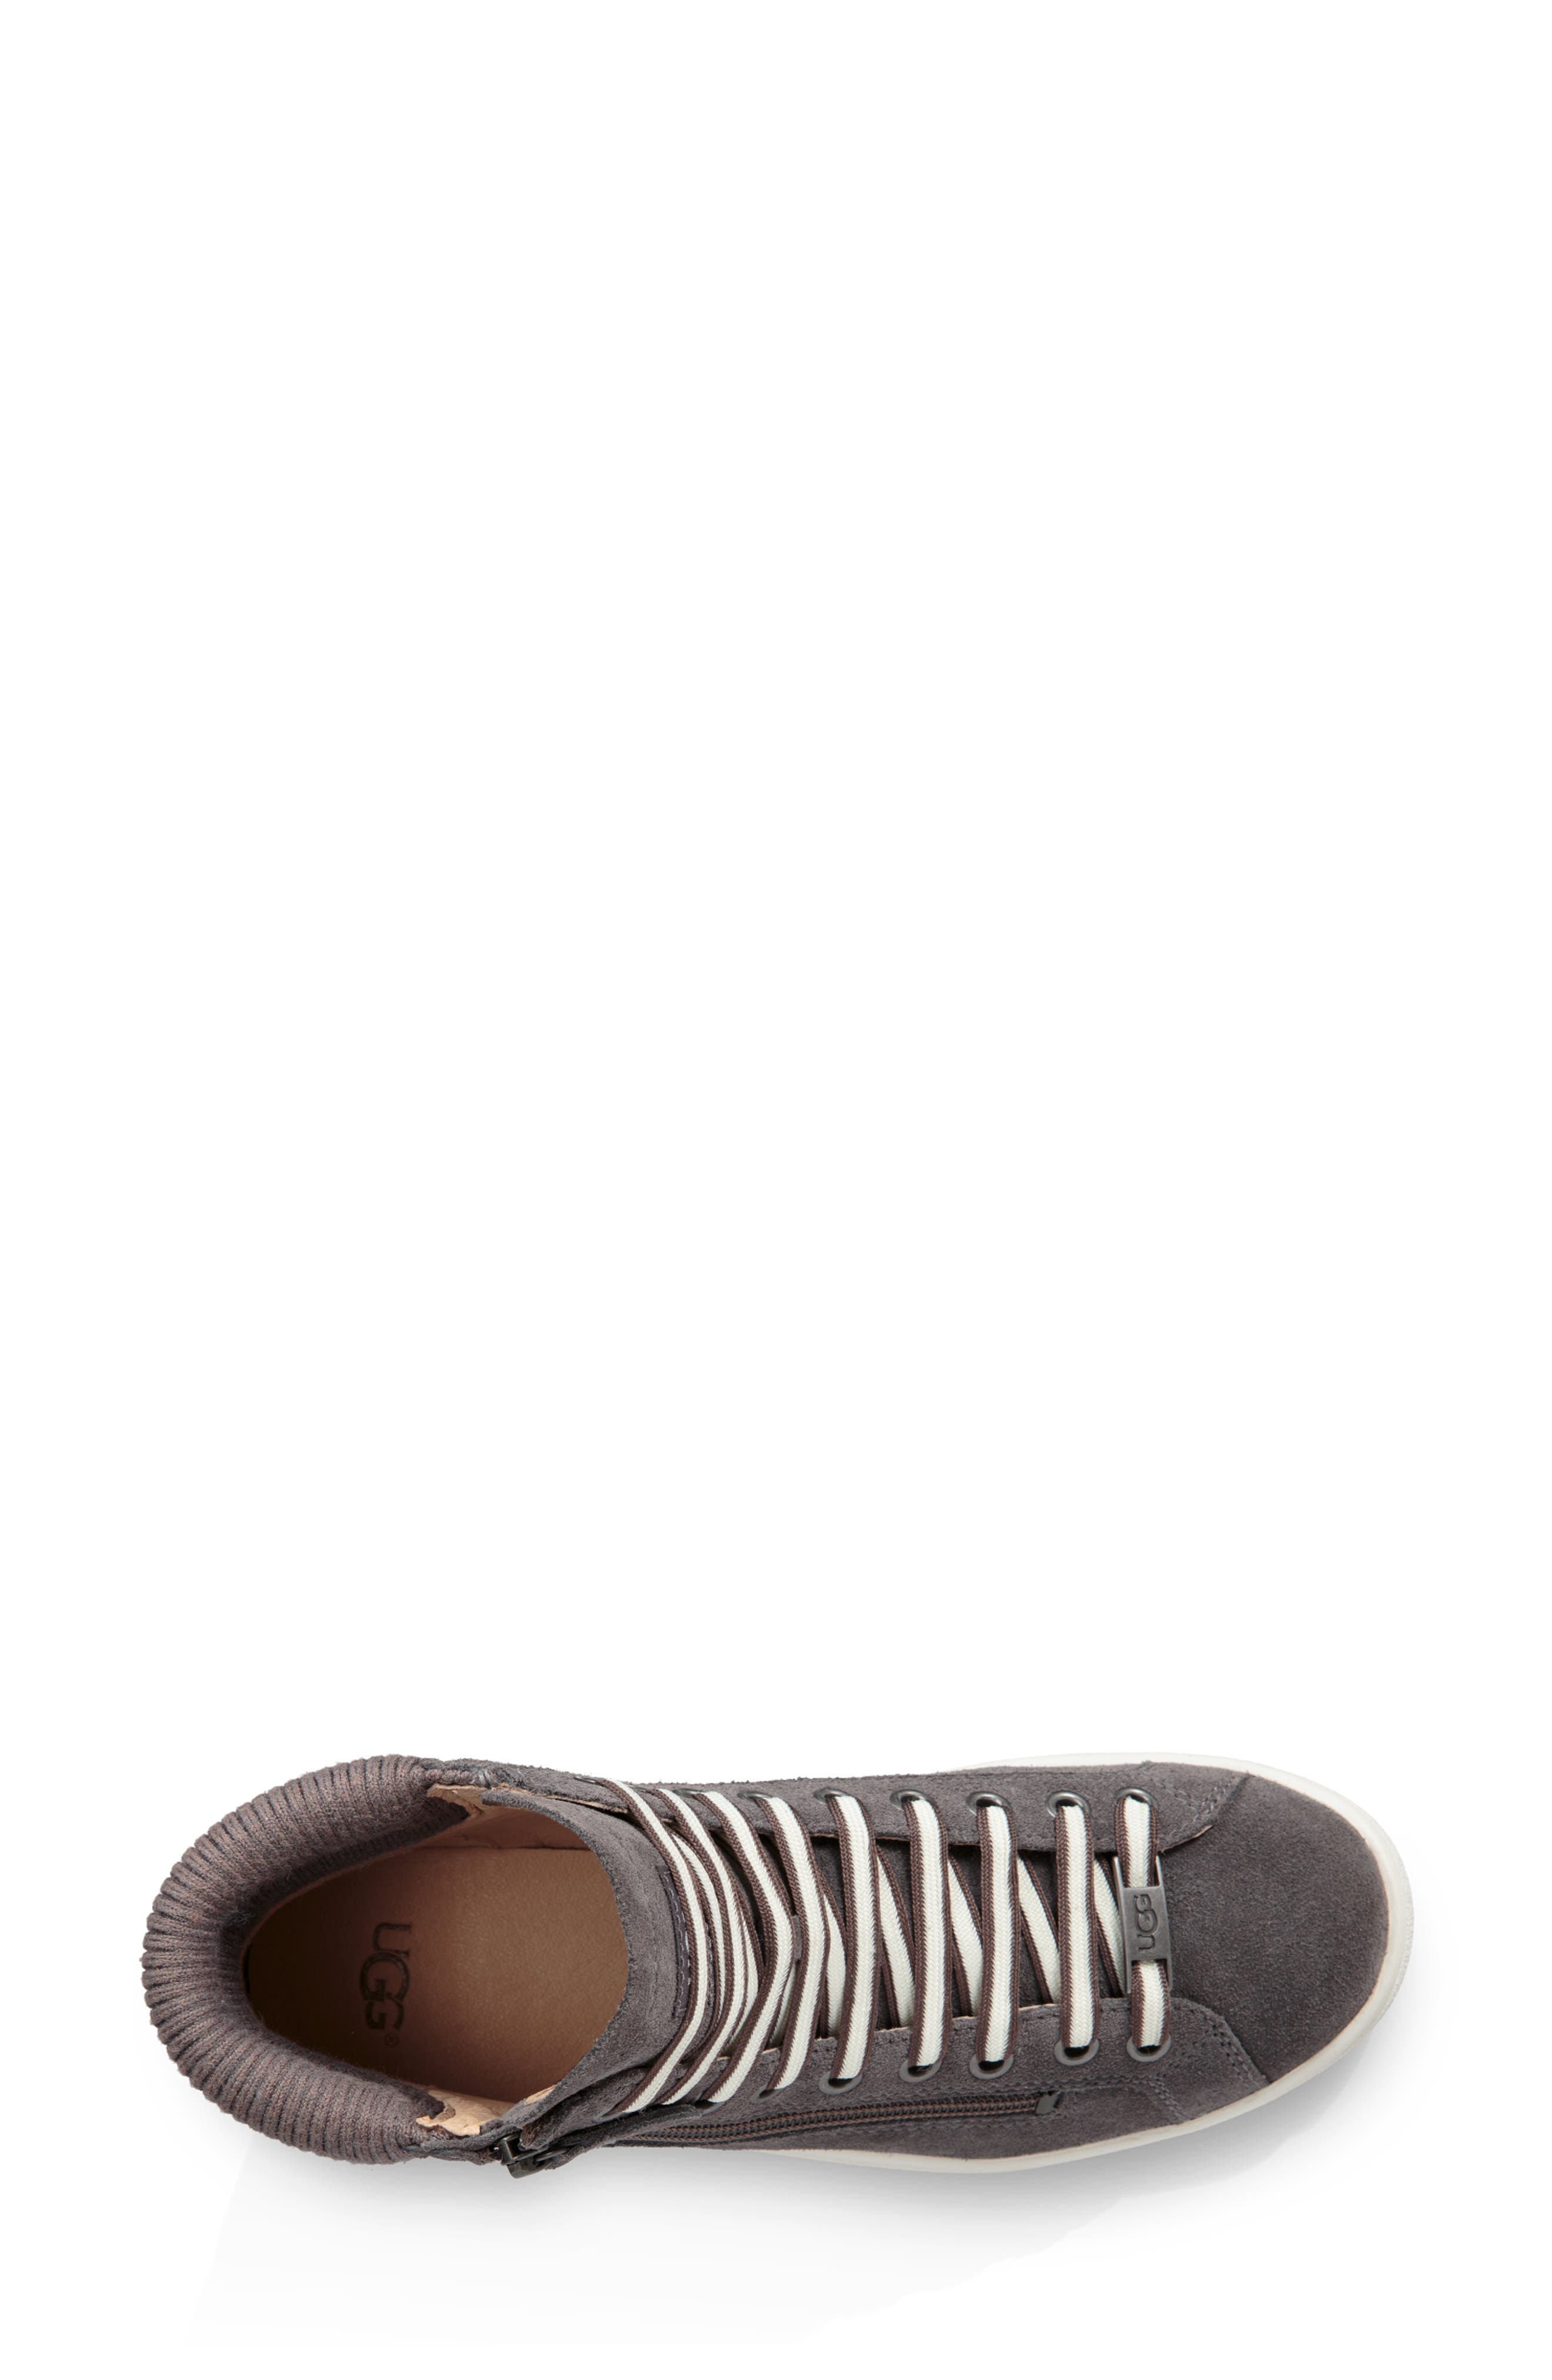 ugg olive high top sneaker charcoal